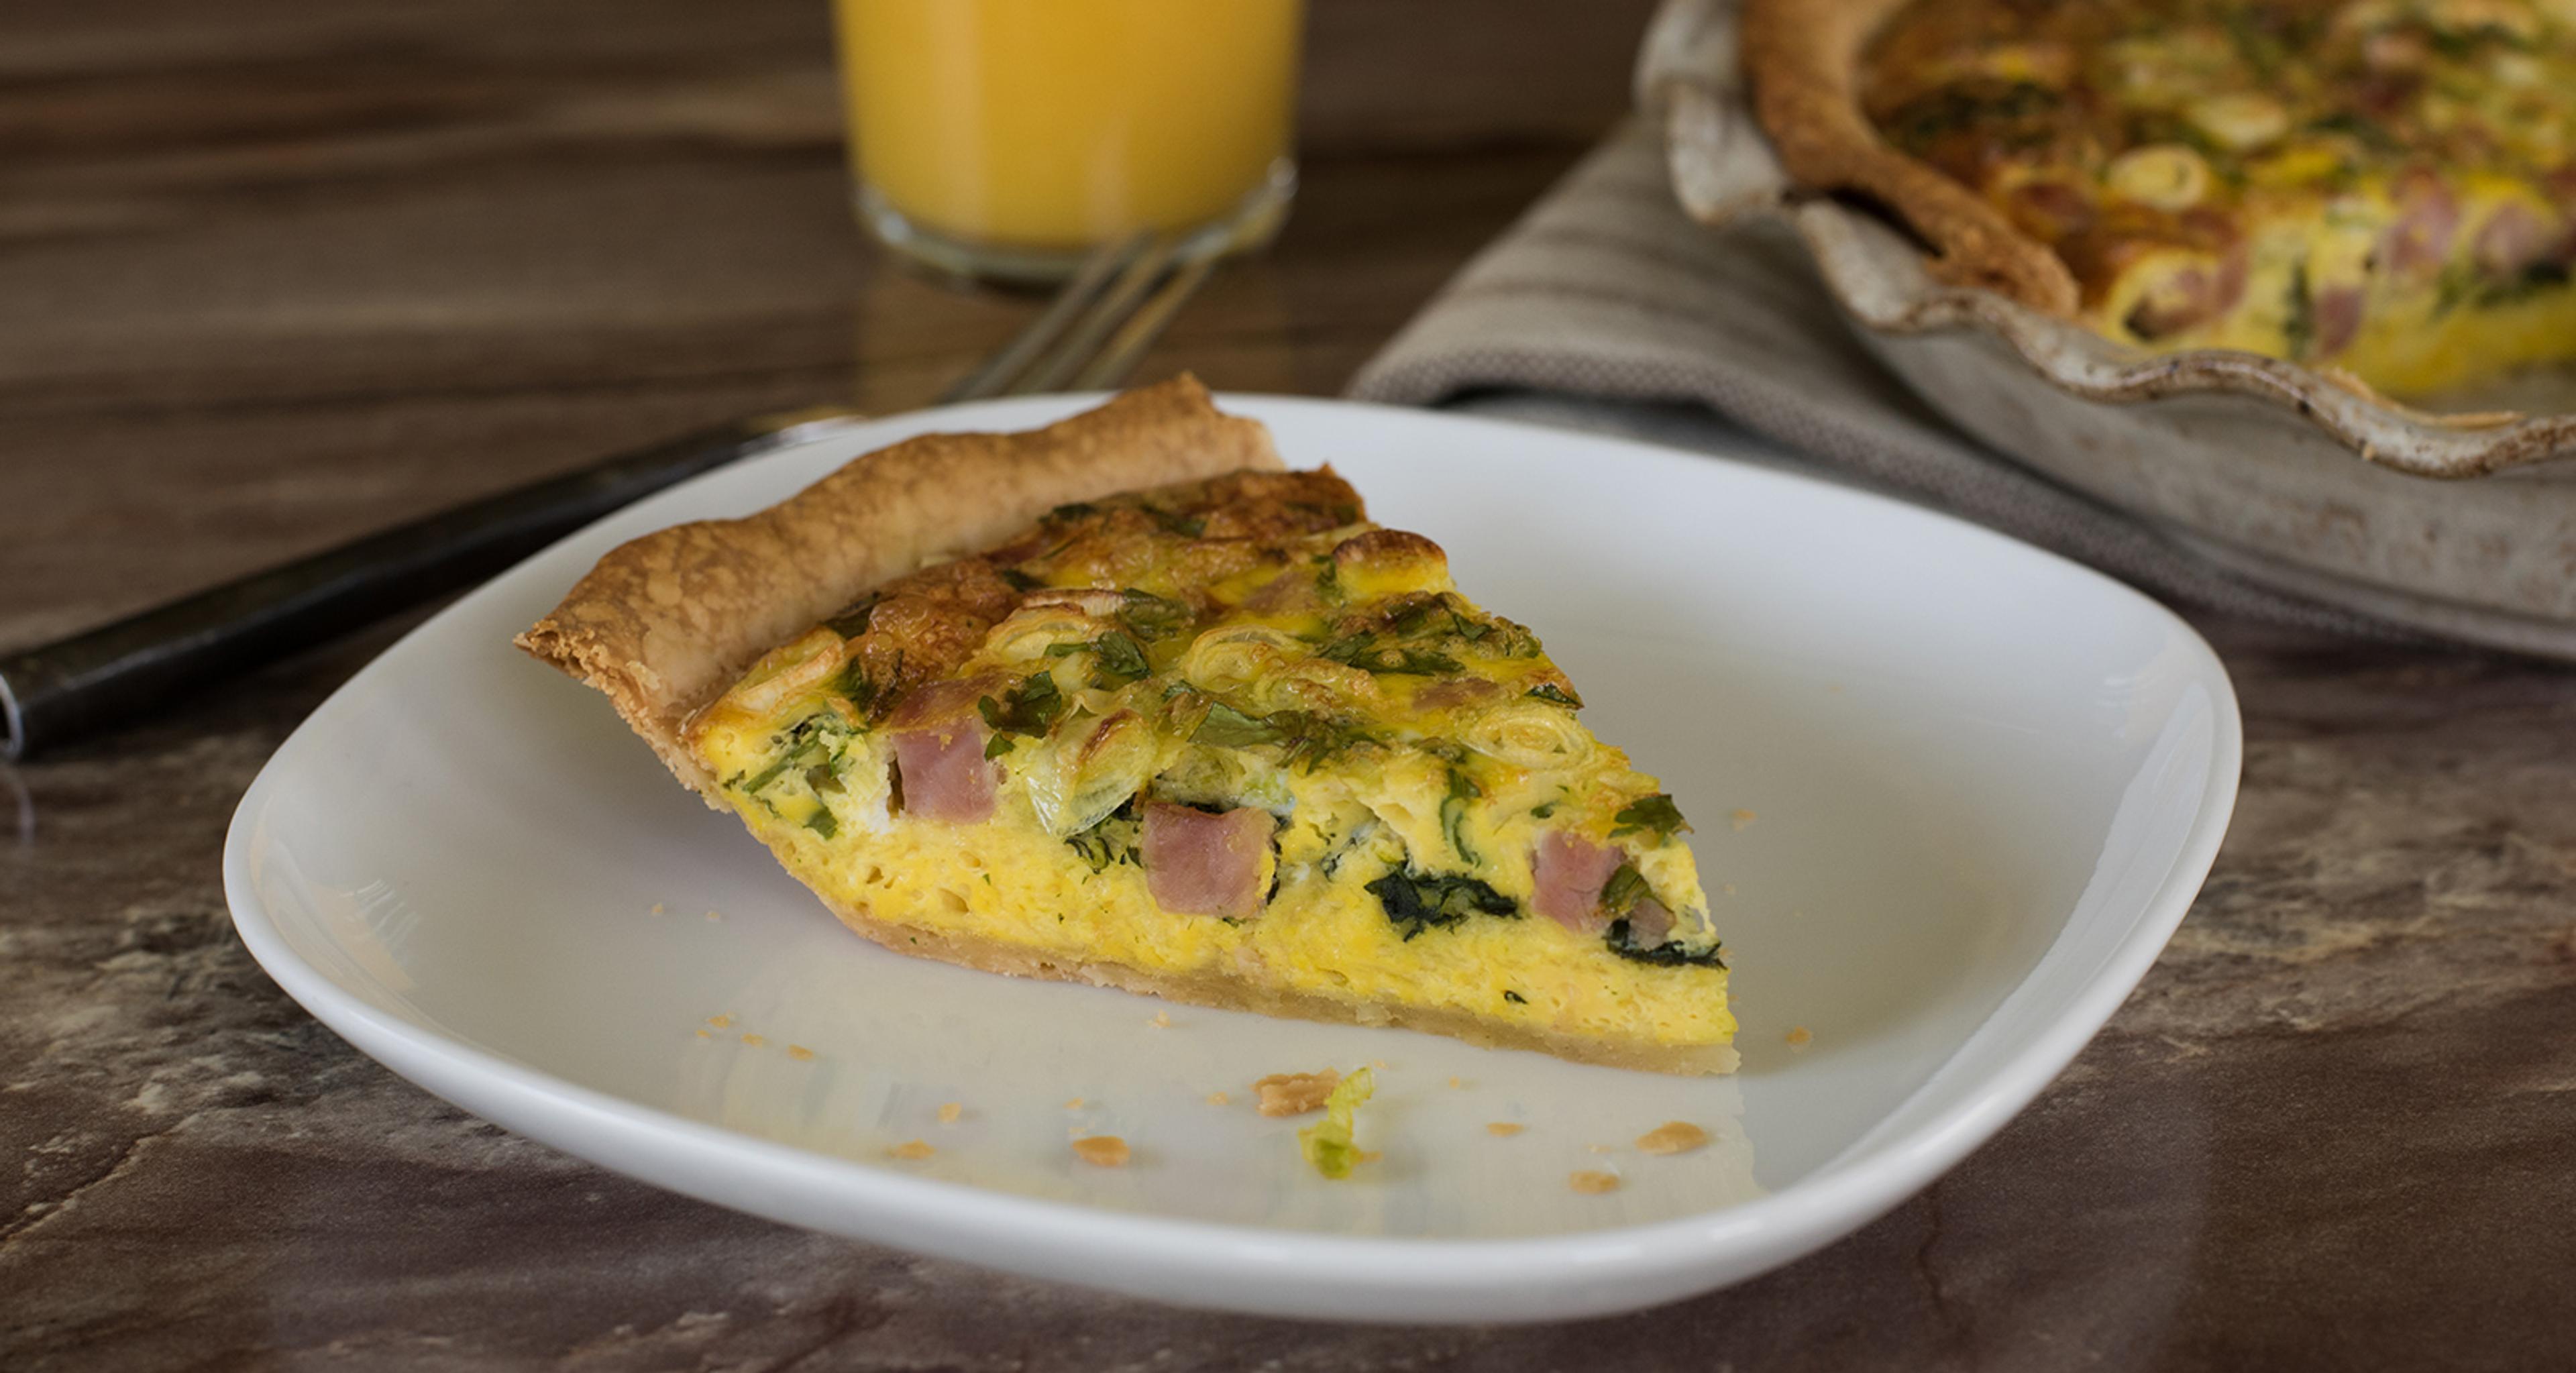 This Breakfast Delight Quiche combines classic flavors in an easy pie crust.